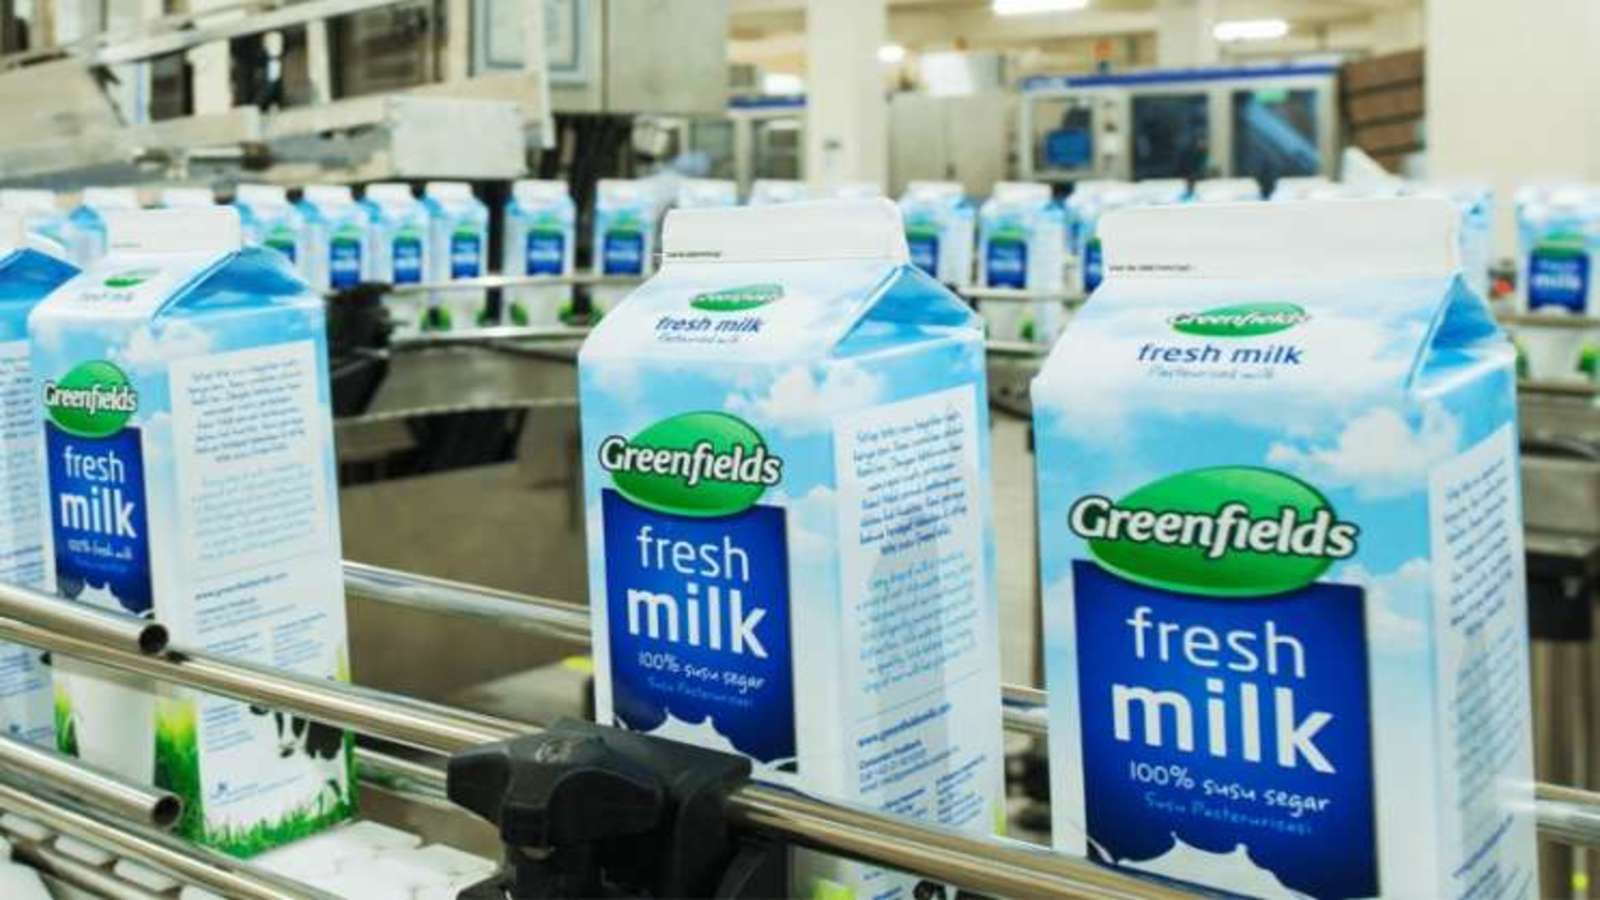 TPG, Northstar acquire majority stake in Indonesia’s largest dairy business PT Green Fields